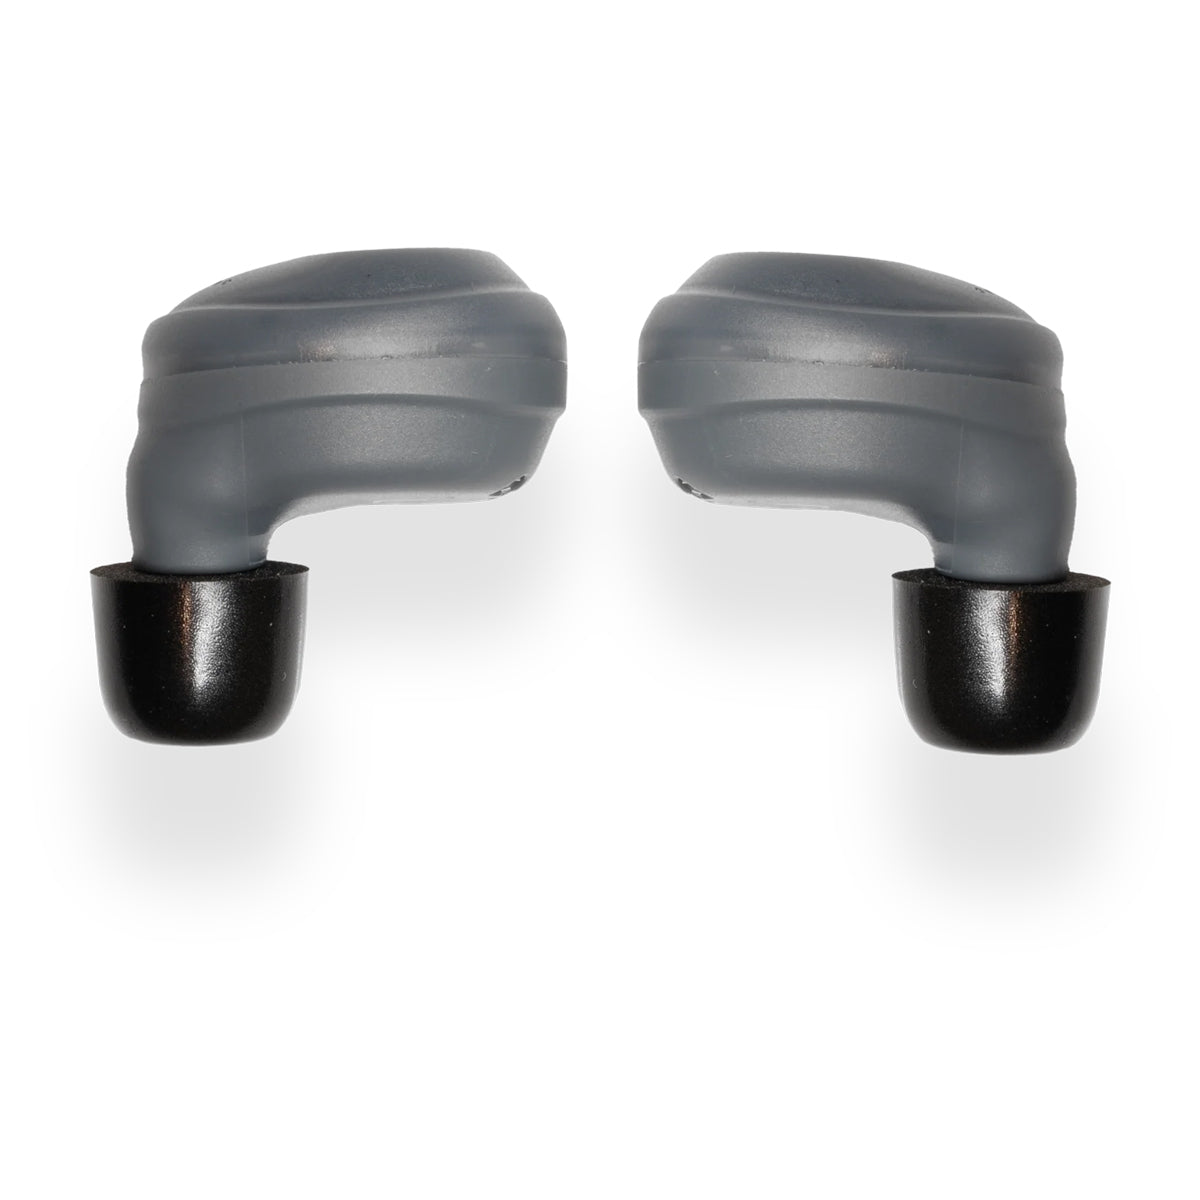 Axil XCOR Digital Earbuds in No Bluetooth by GOHUNT | Axil - GOHUNT Shop